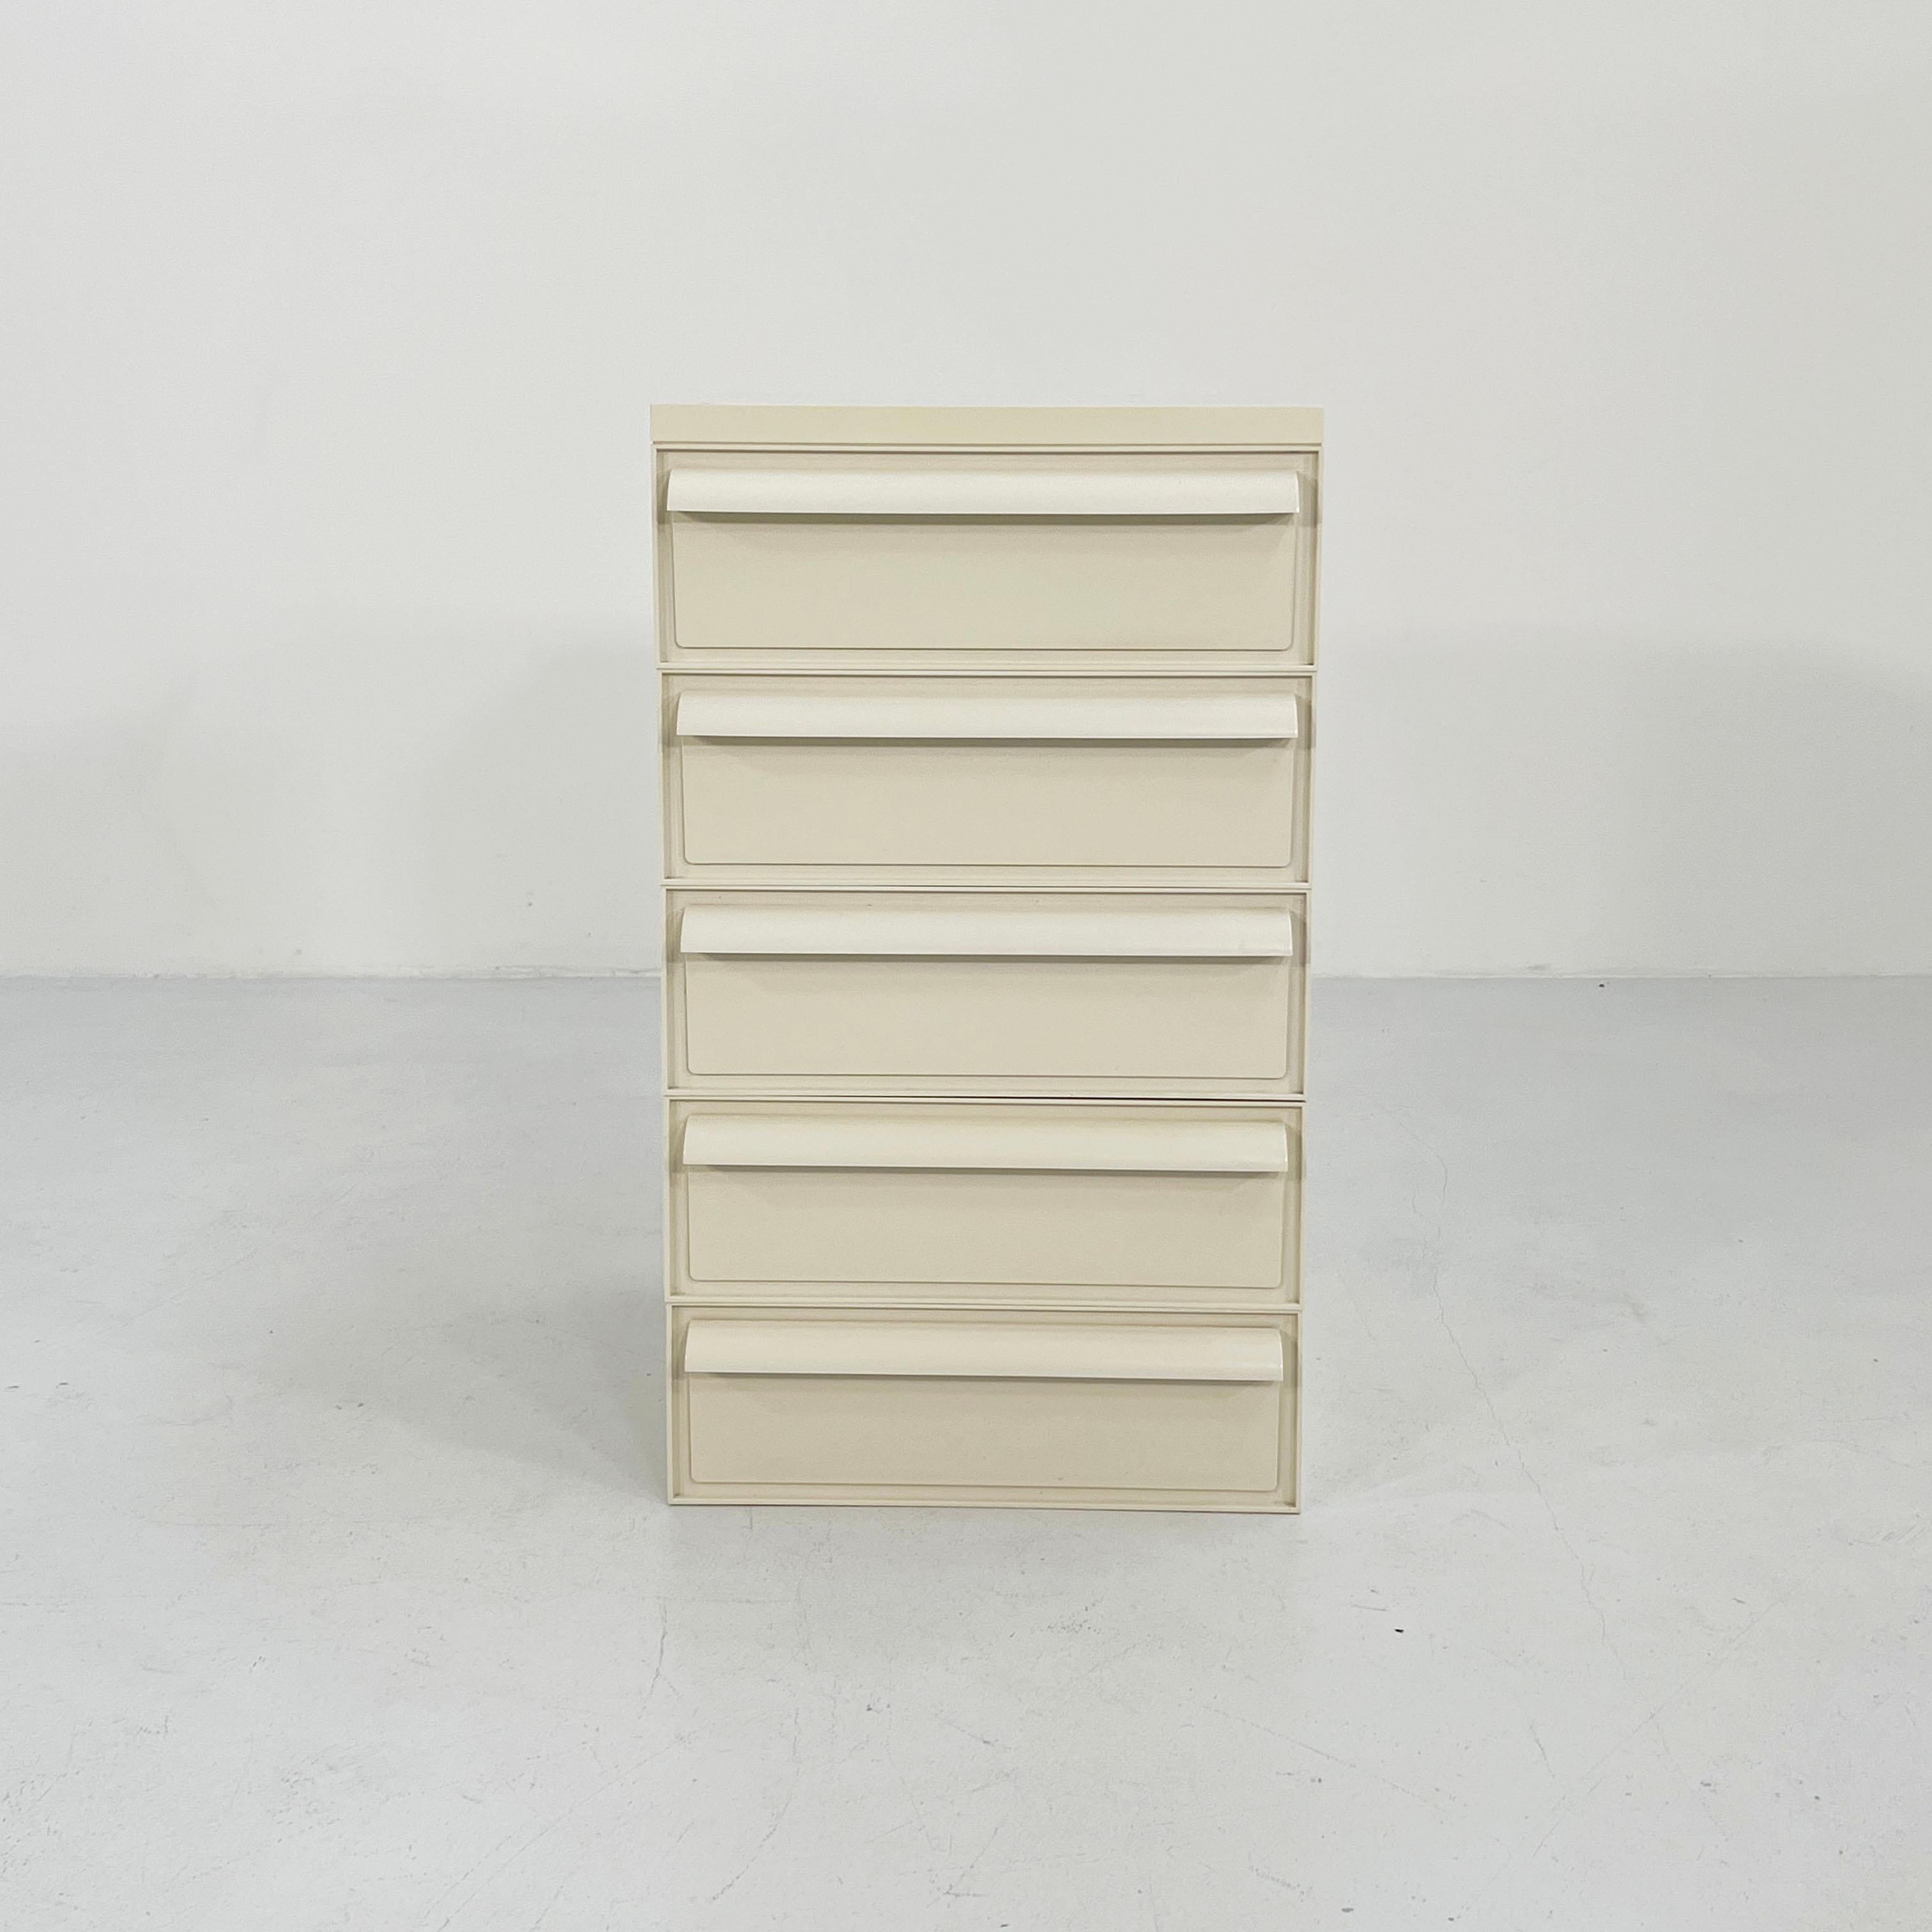 Late 20th Century White Chest of Drawers Model “4601” by Simon Fussell for Kartell, 1970s